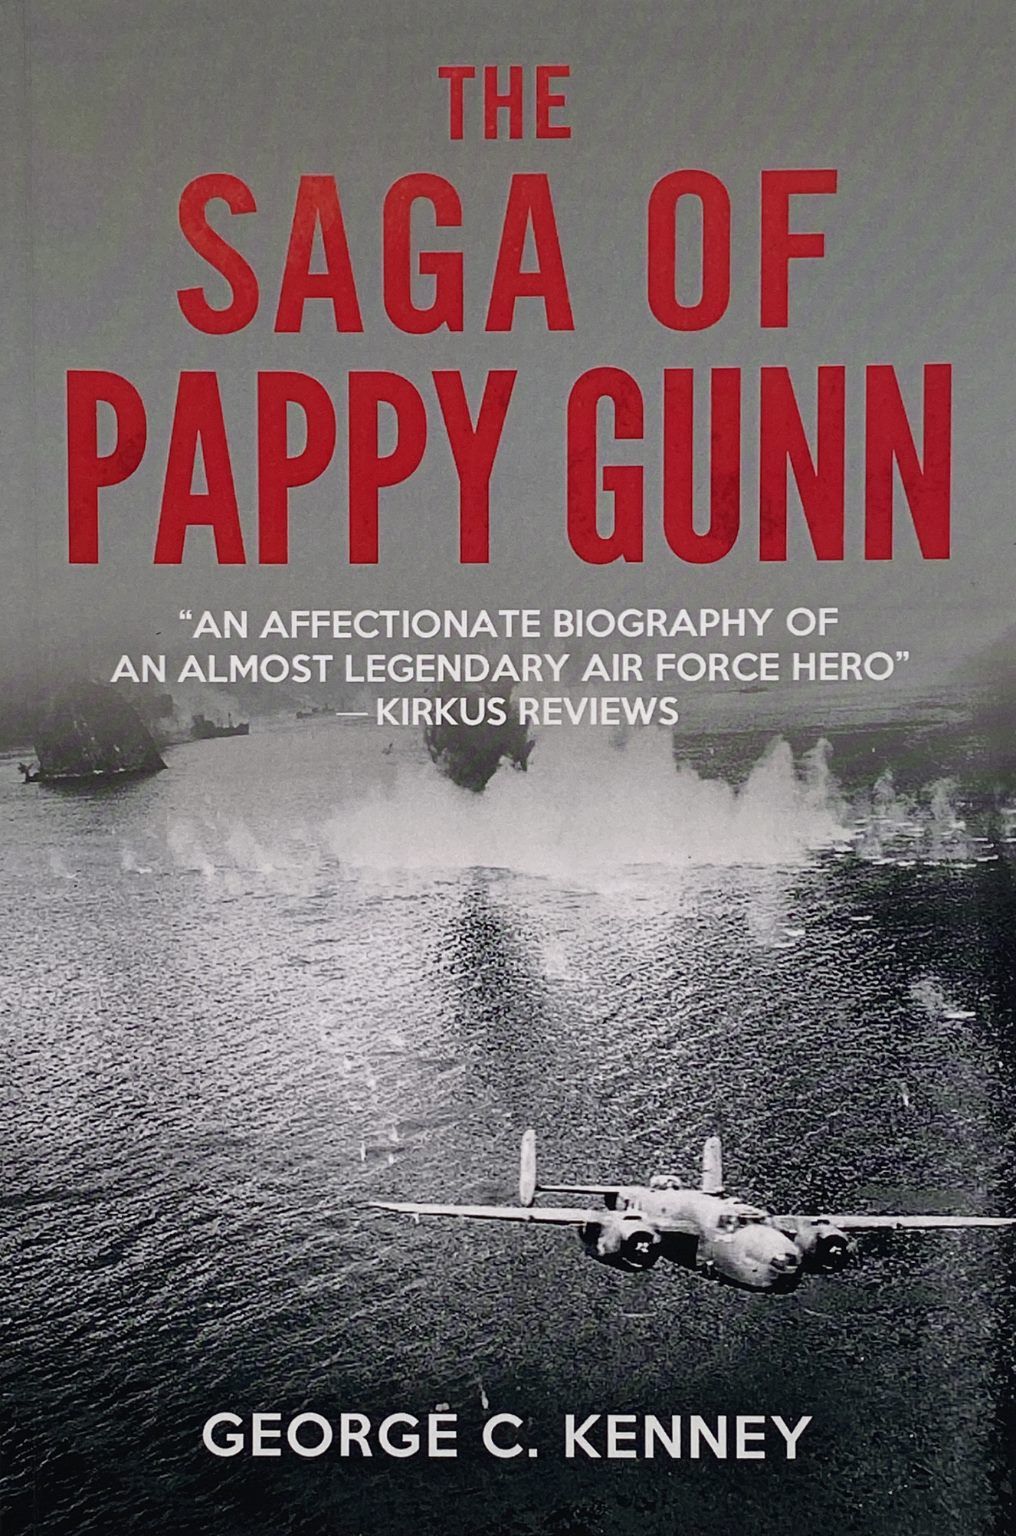 THE SAGA OF PAPPY GUNN: An affectionate biography of an almost legendary Air Force Hero